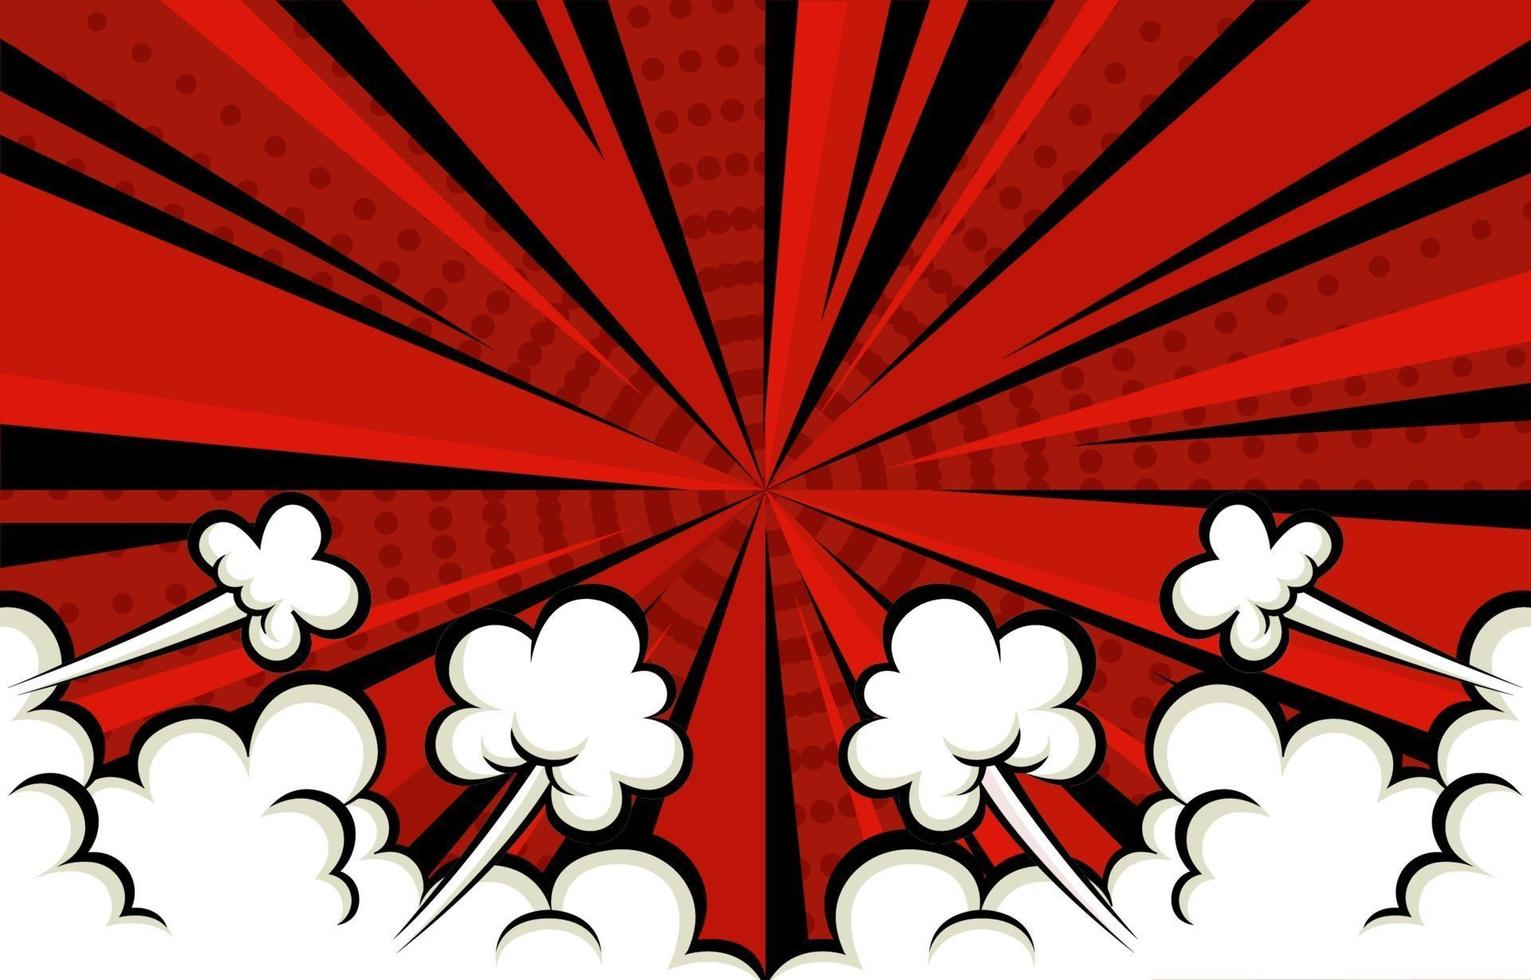 Comic Style Red Background with Cloud vector